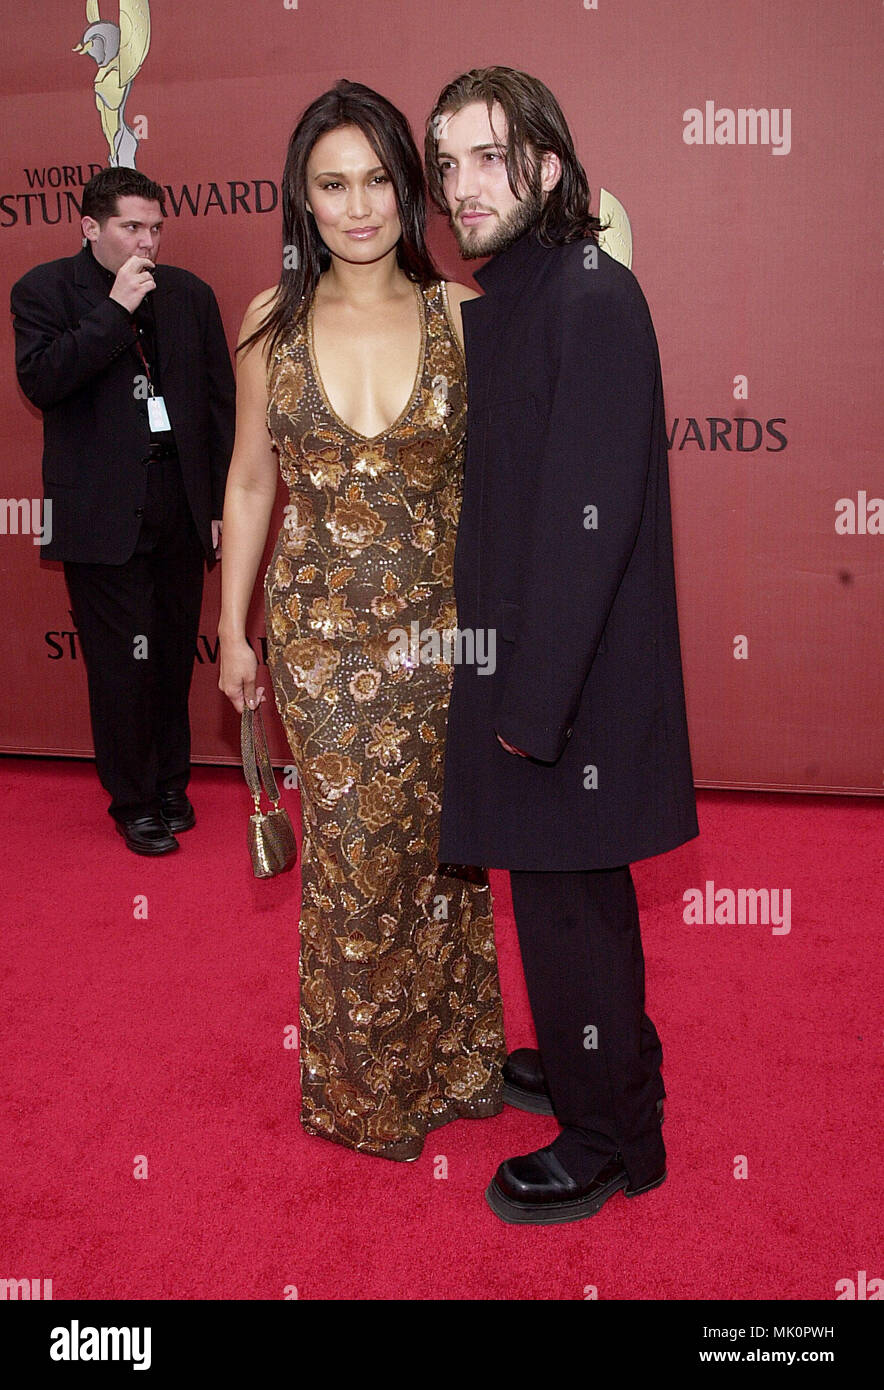 Tia Carrere and Stephen arriving at the 1st World Stunt Awards at the Barker Hangar in Santa Monica Airport in Los Angeles  5/20/2001            -            CarrereTia Stephen01.JPG           -              CarrereTia Stephen01.JPGCarrereTia Stephen01  Event in Hollywood Life - California,  Red Carpet Event, Vertical, USA, Film Industry, Celebrities,  Photography, Bestof, Arts Culture and Entertainment, Topix Celebrities fashion /  from the Red Carpet-, Vertical, Best of, Hollywood Life, Event in Hollywood Life - California,  Red Carpet , USA, Film Industry, Celebrities,  movie celebrities, T Stock Photo